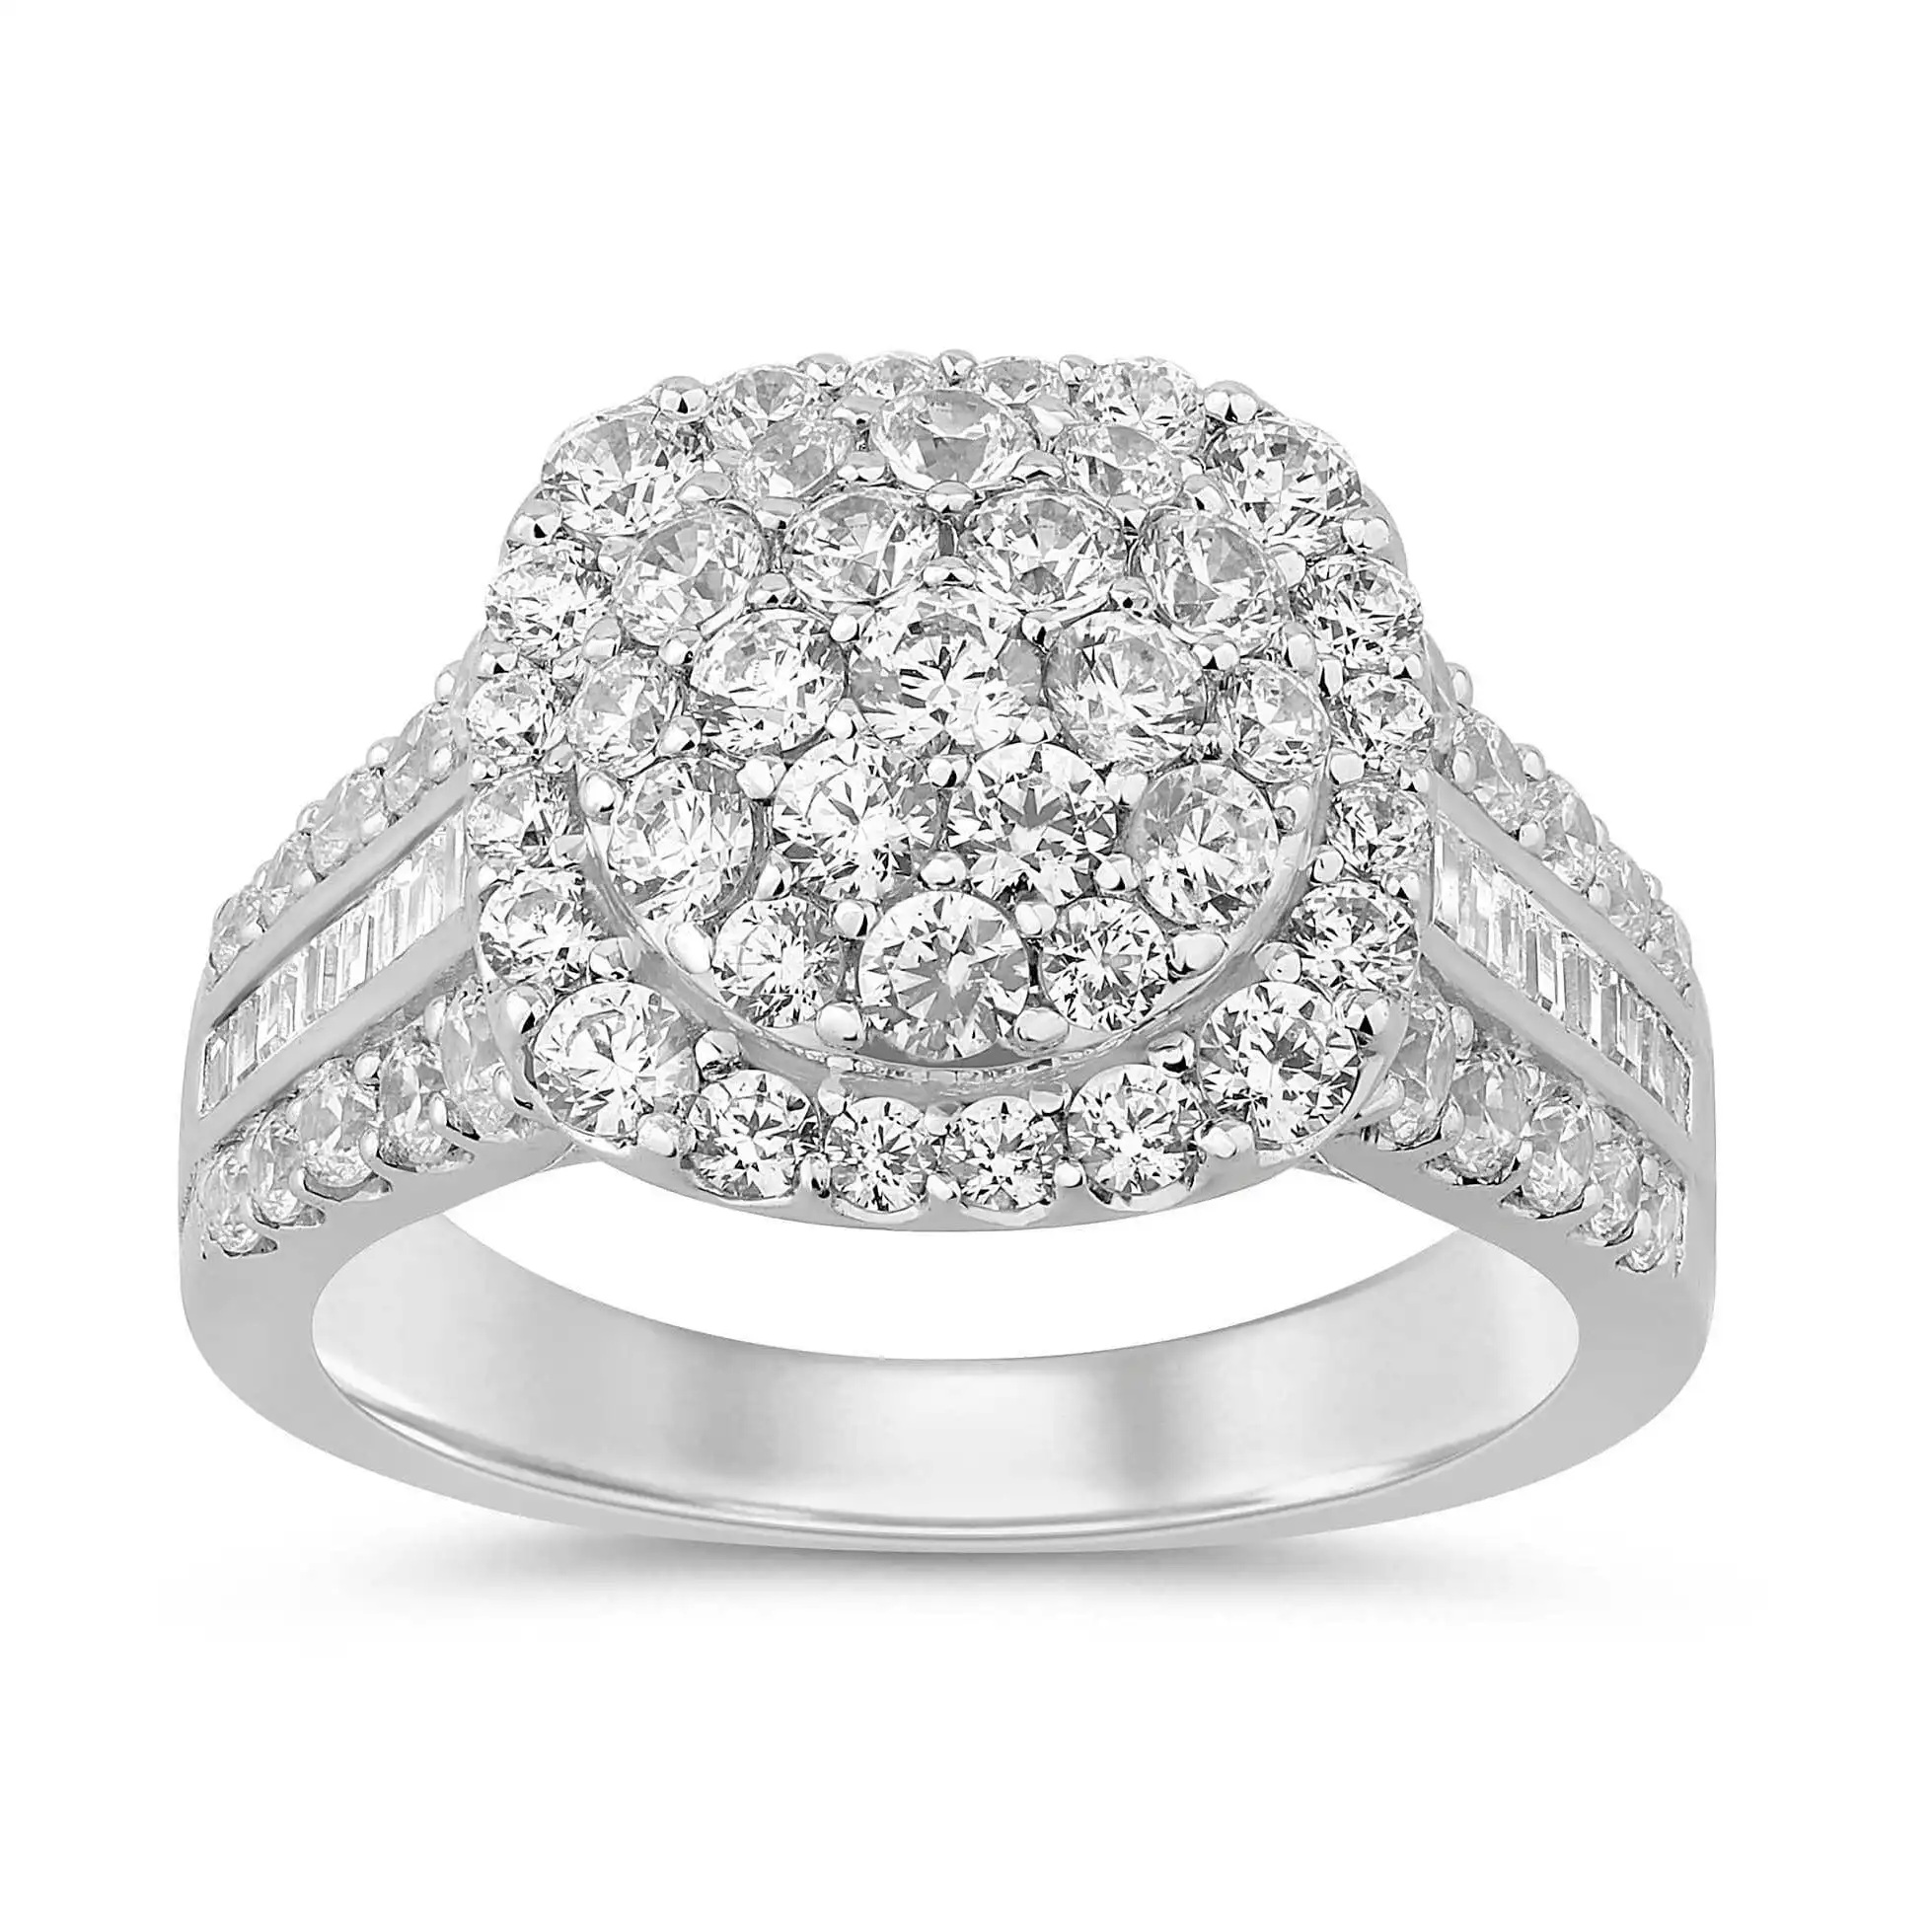 Meera Cushion Shape Ring with 2.00ct of Laboratory Grown Diamonds in 9ct White Gold